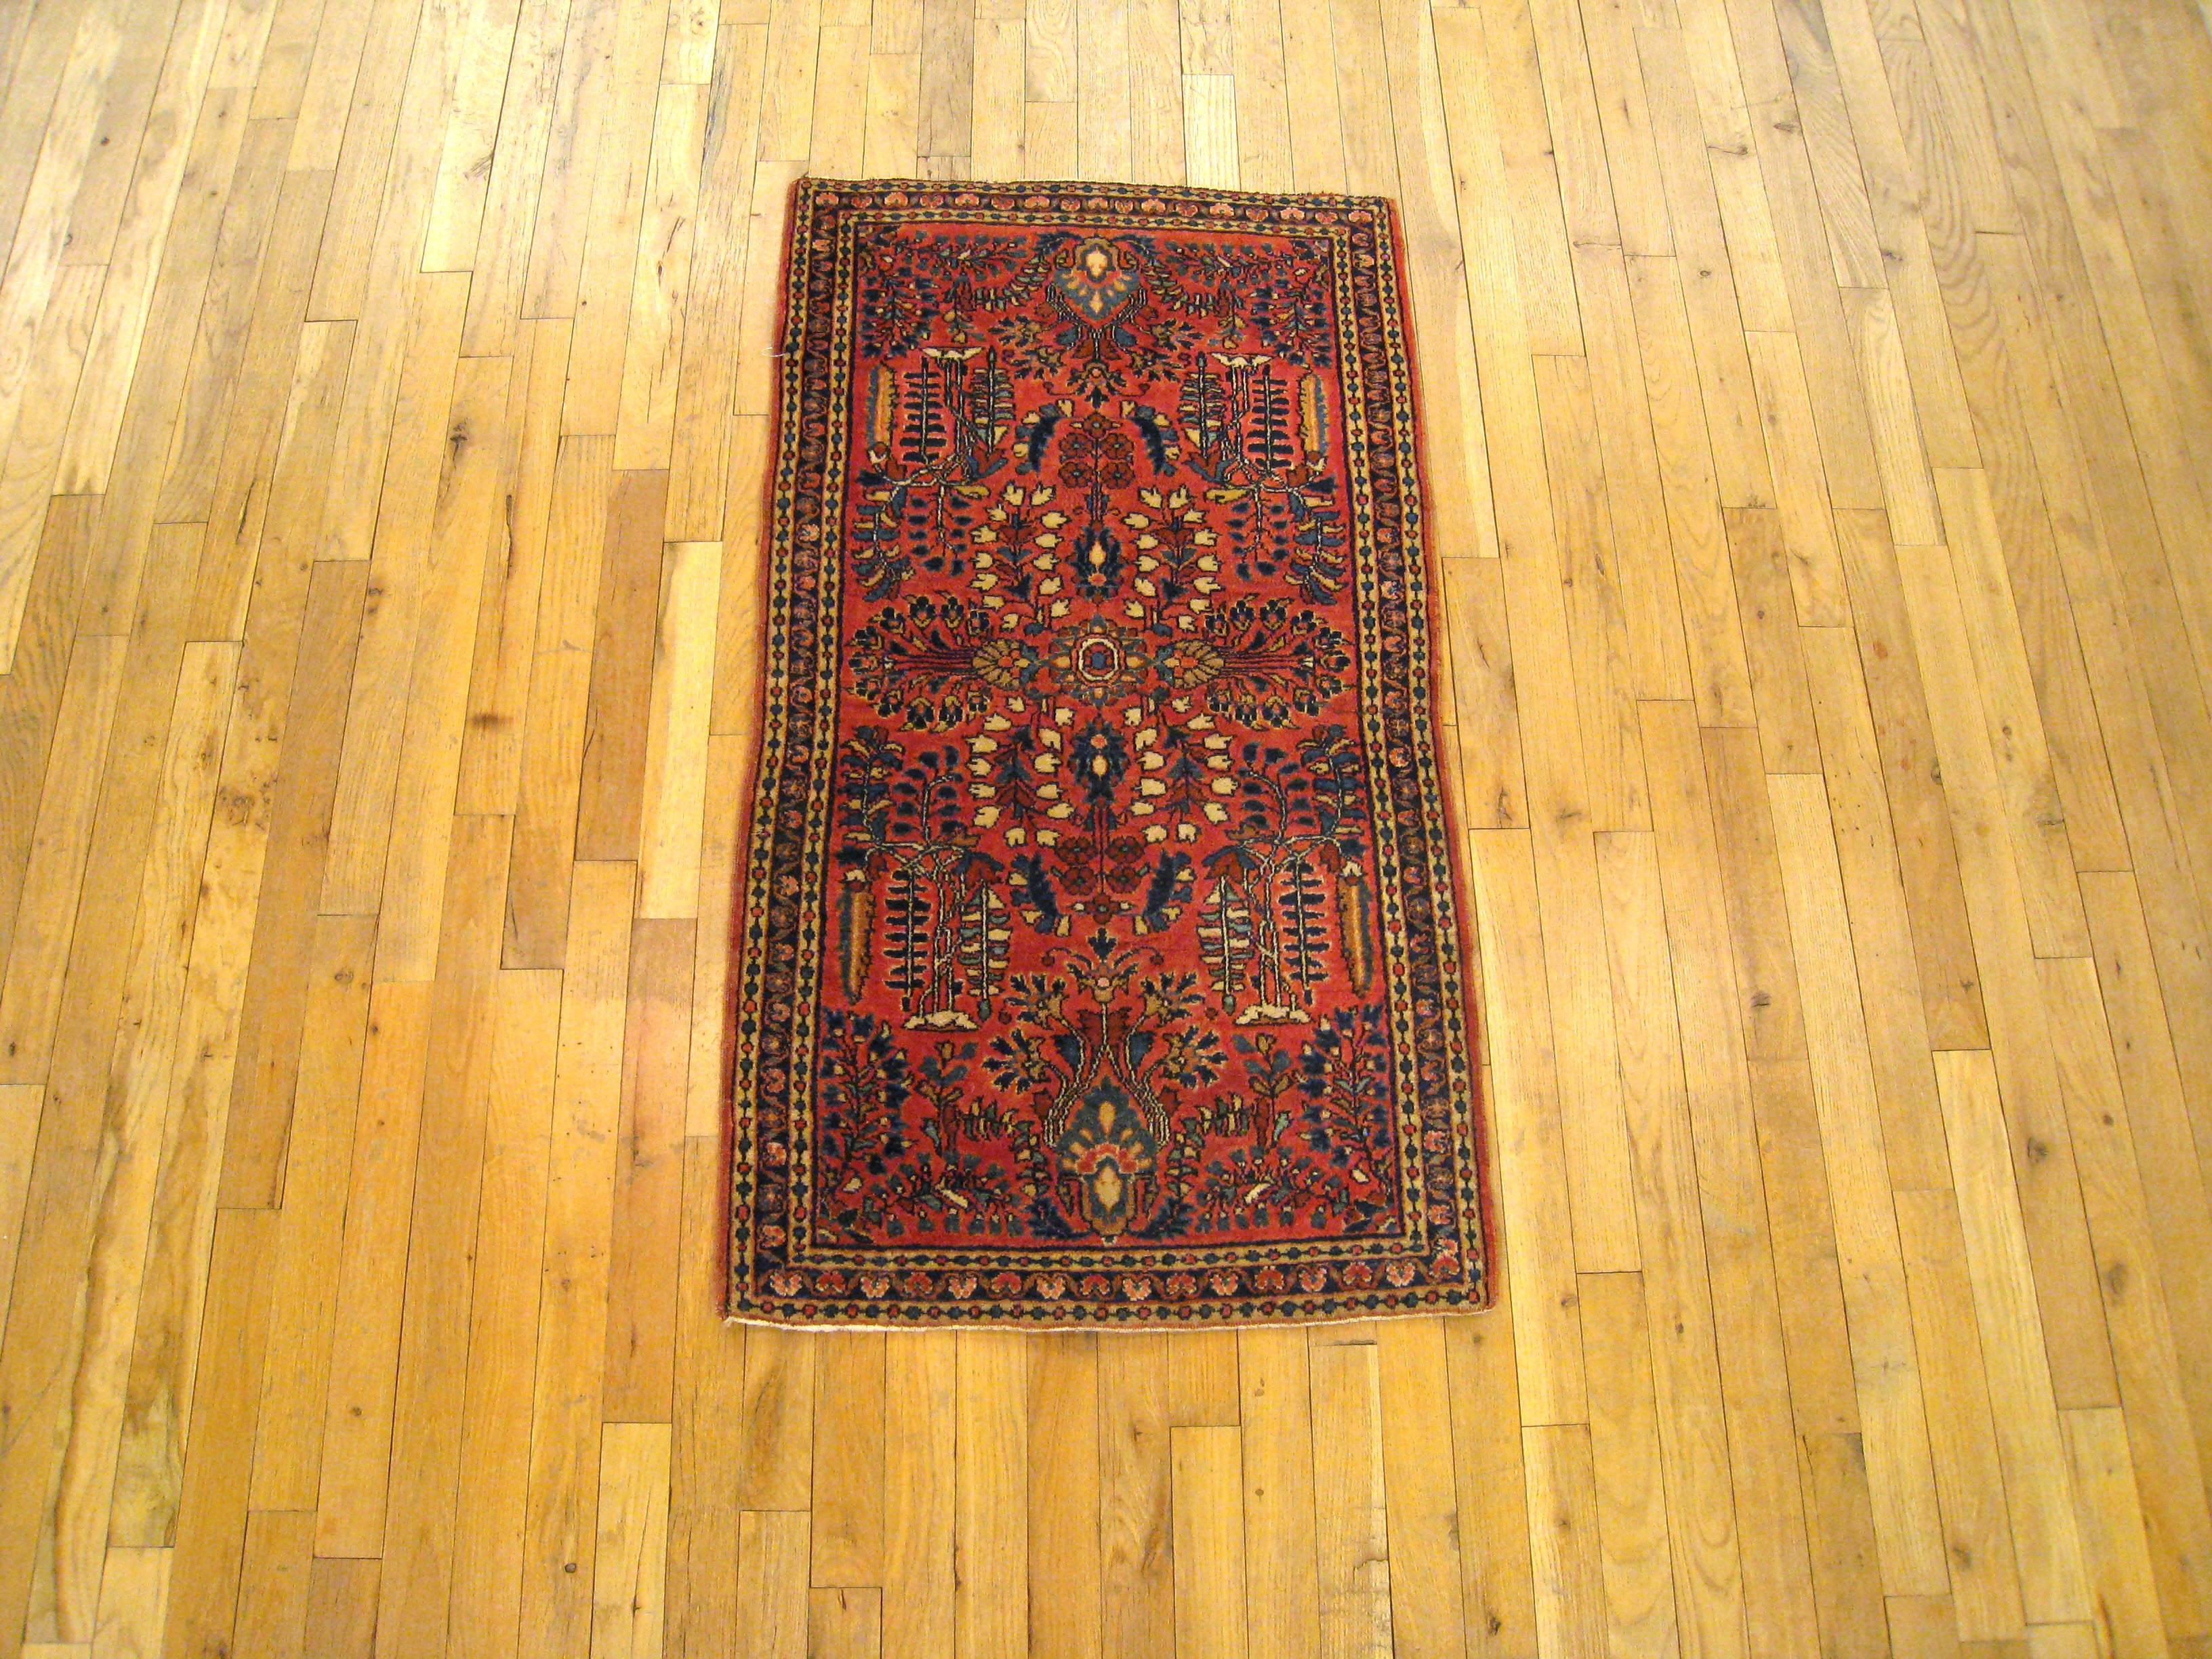 An antique Persian Sarouk oriental rug, size 4'0 x 2'2, circa 1920. This handsome hand-knotted Persian carpet features a symmetrical design in the red central field, consisting of neatly arranged floral elements and cypress trees. Enclosed within a